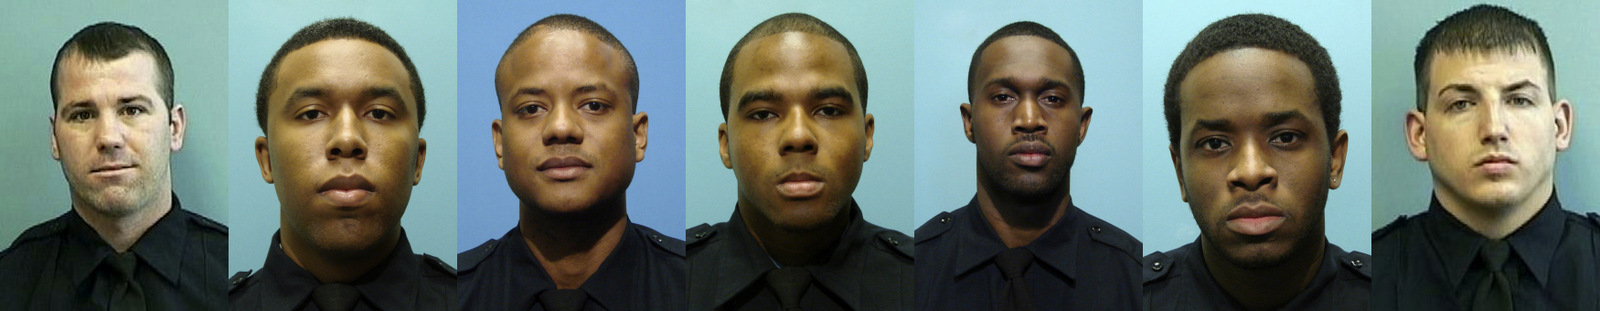 Daniel Hersl, Evodio Hendrix, Jemell Rayam, Marcus Taylor, Maurice Ward, Momodu Gando and Wayne Jenkins, the seven police officers who are facing charges of robbery, extortion and overtime fraud, and are accused of stealing money and drugs from victims, some of whom had not committed crimes. (Baltimore Police Department via AP)